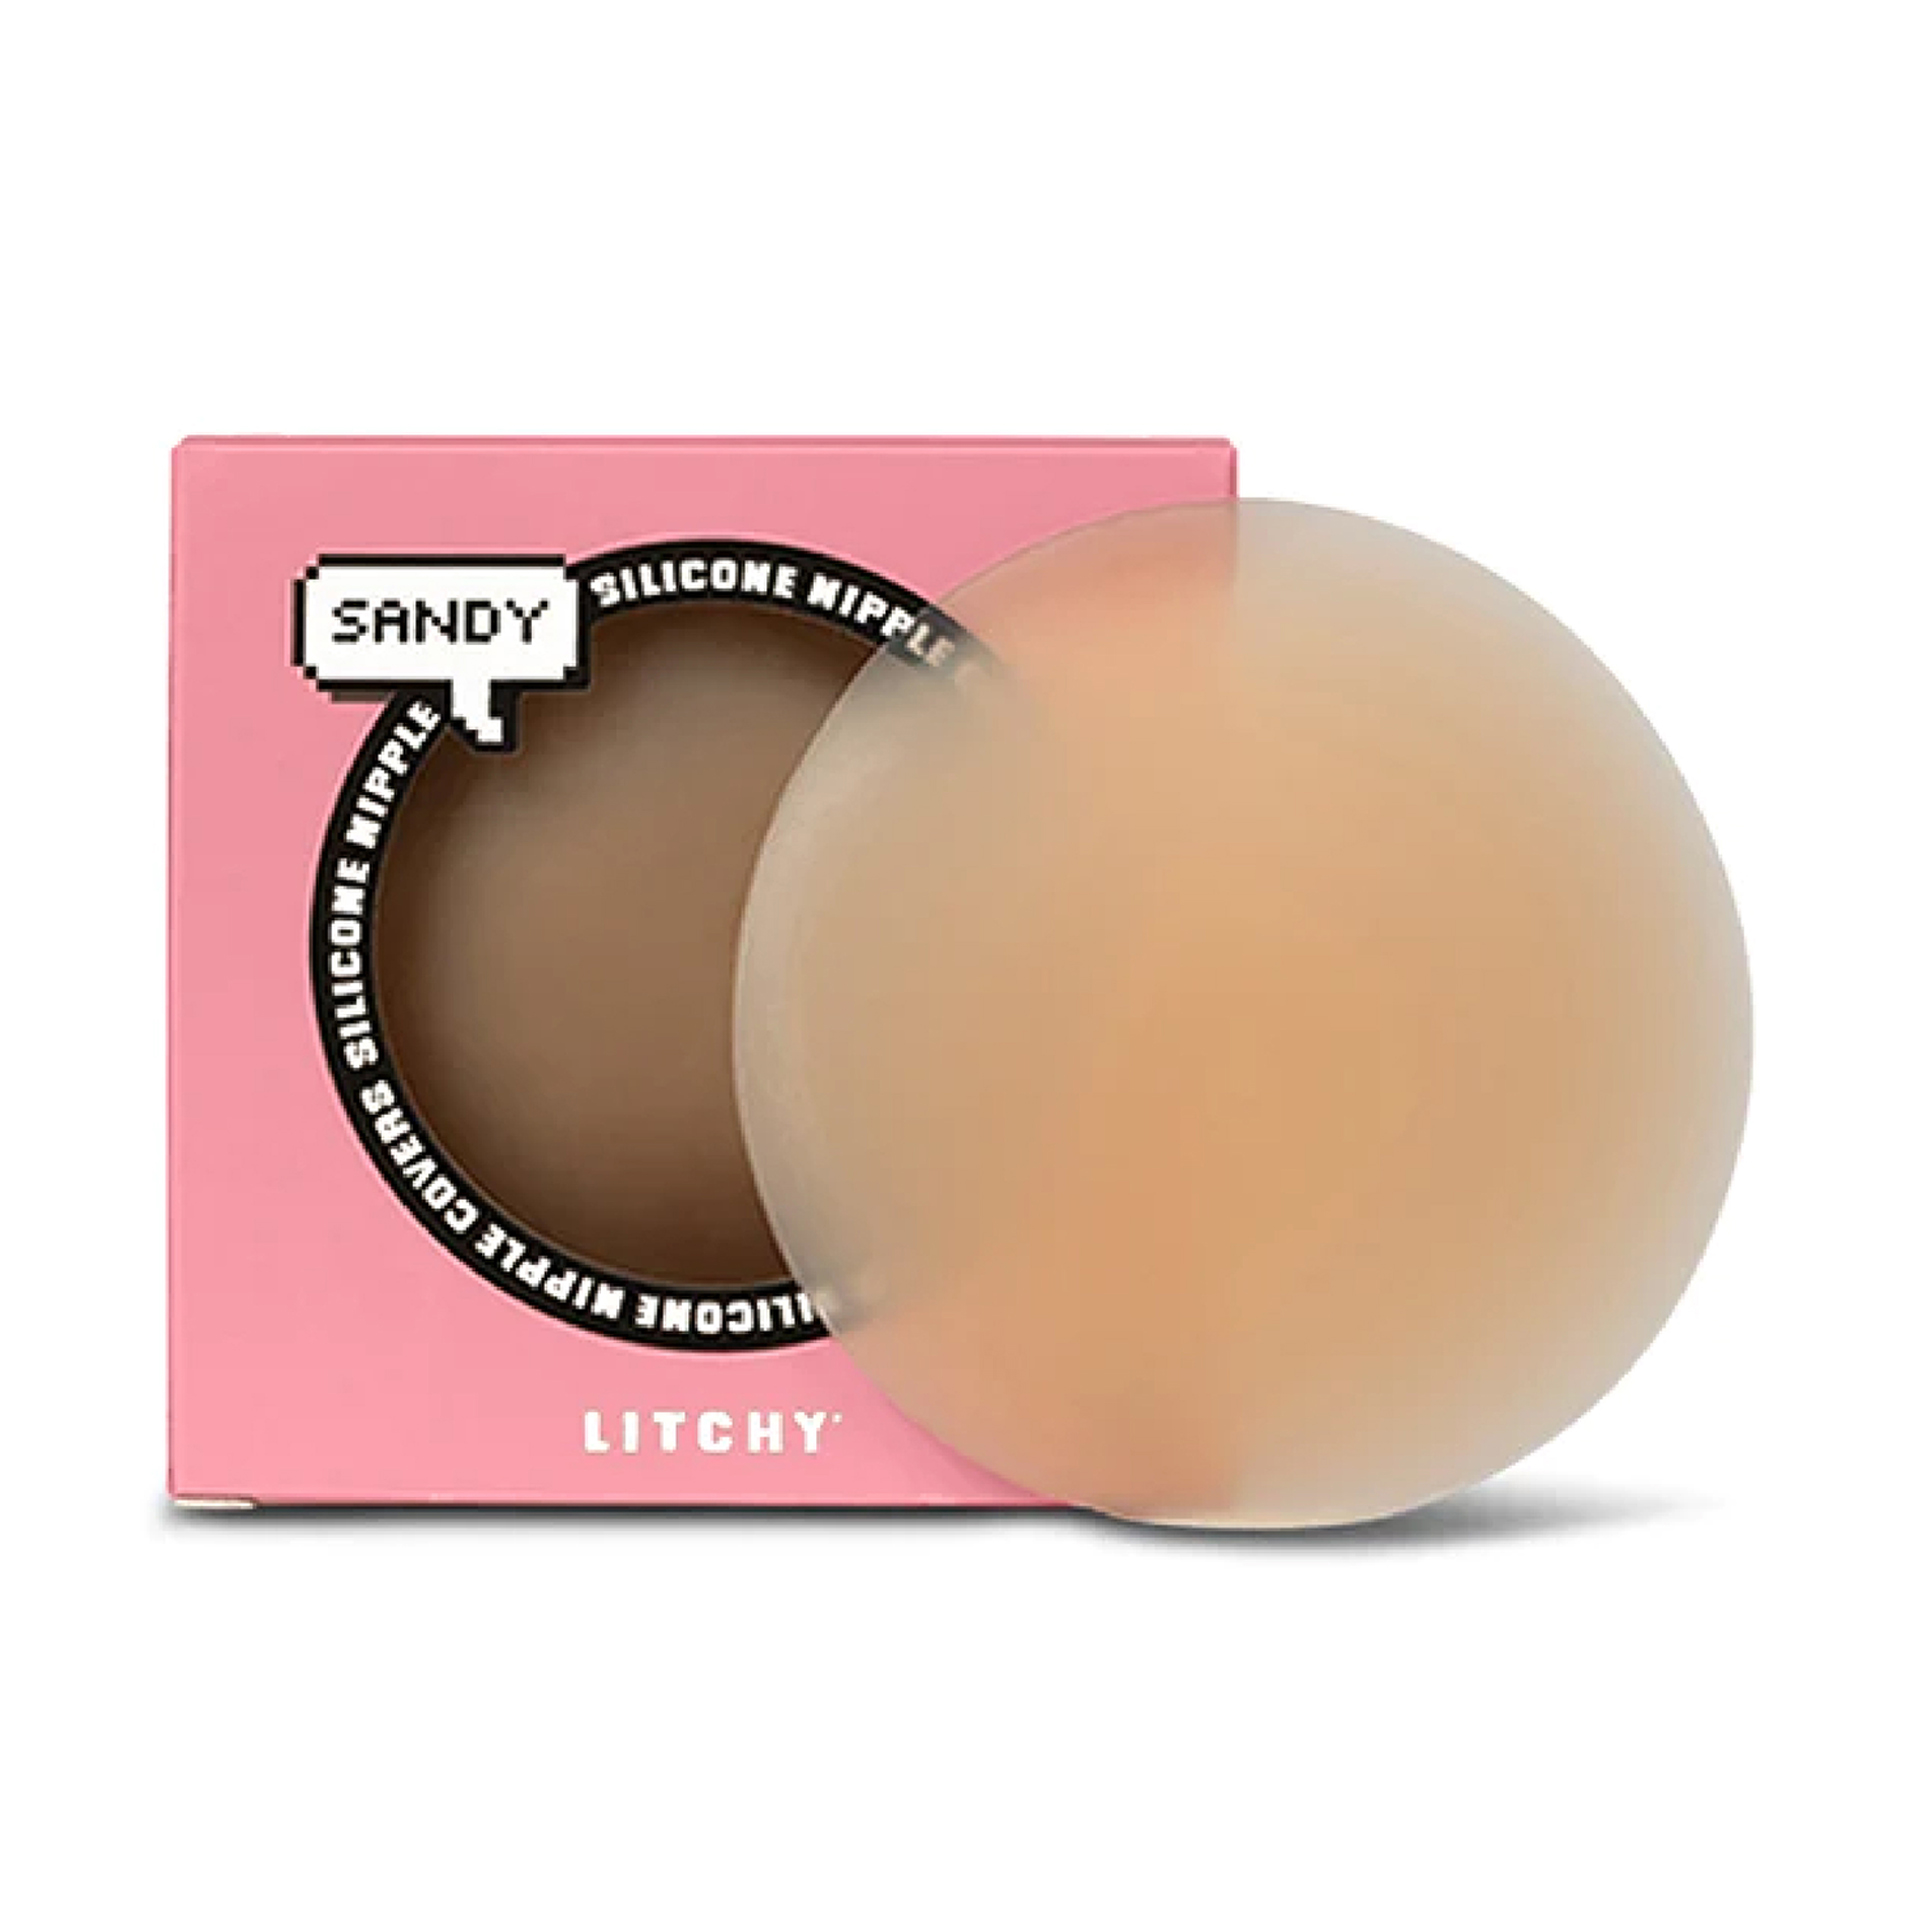 Litchy Silicone nipple covers 1